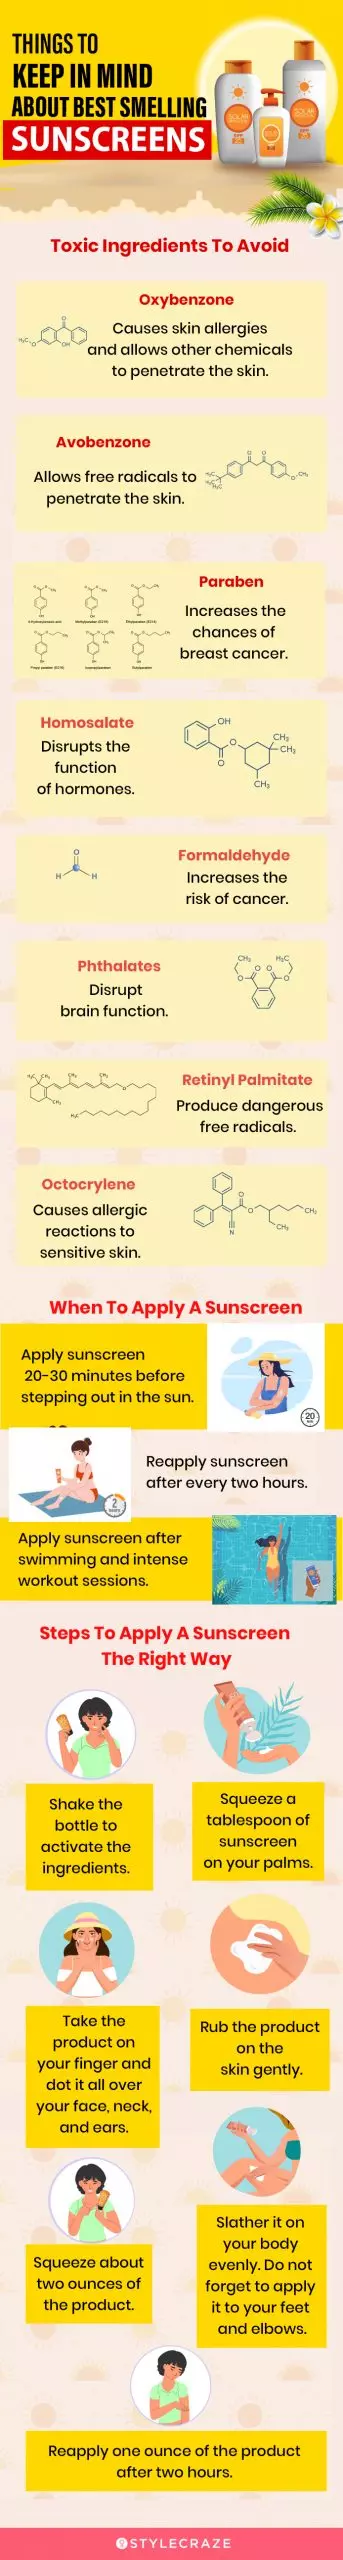 Things To Keep In Mind About Best Smelling Sunscreens (infographic)